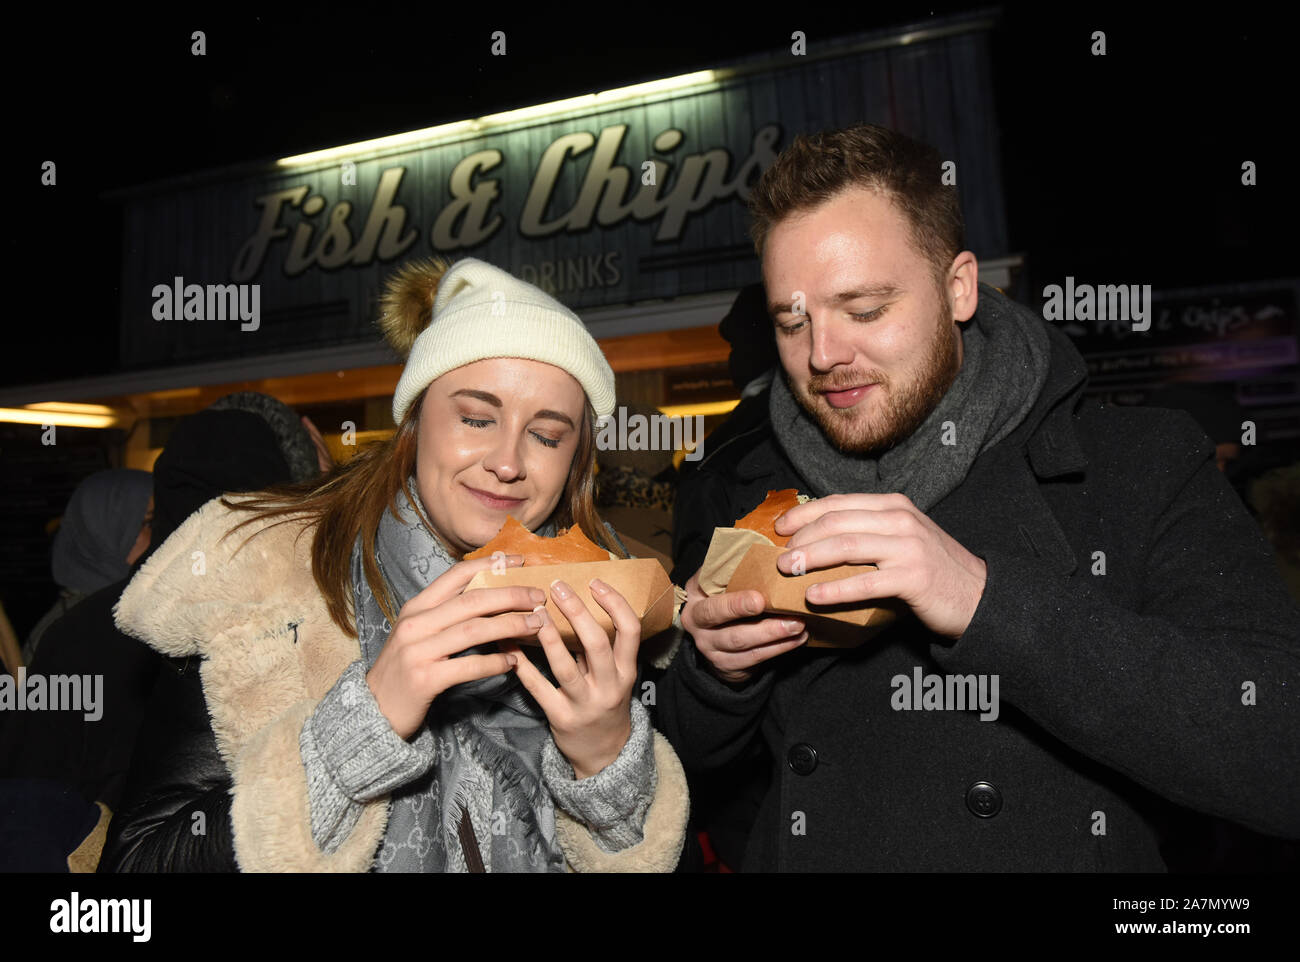 A couple eating take away food at night. Stock Photo